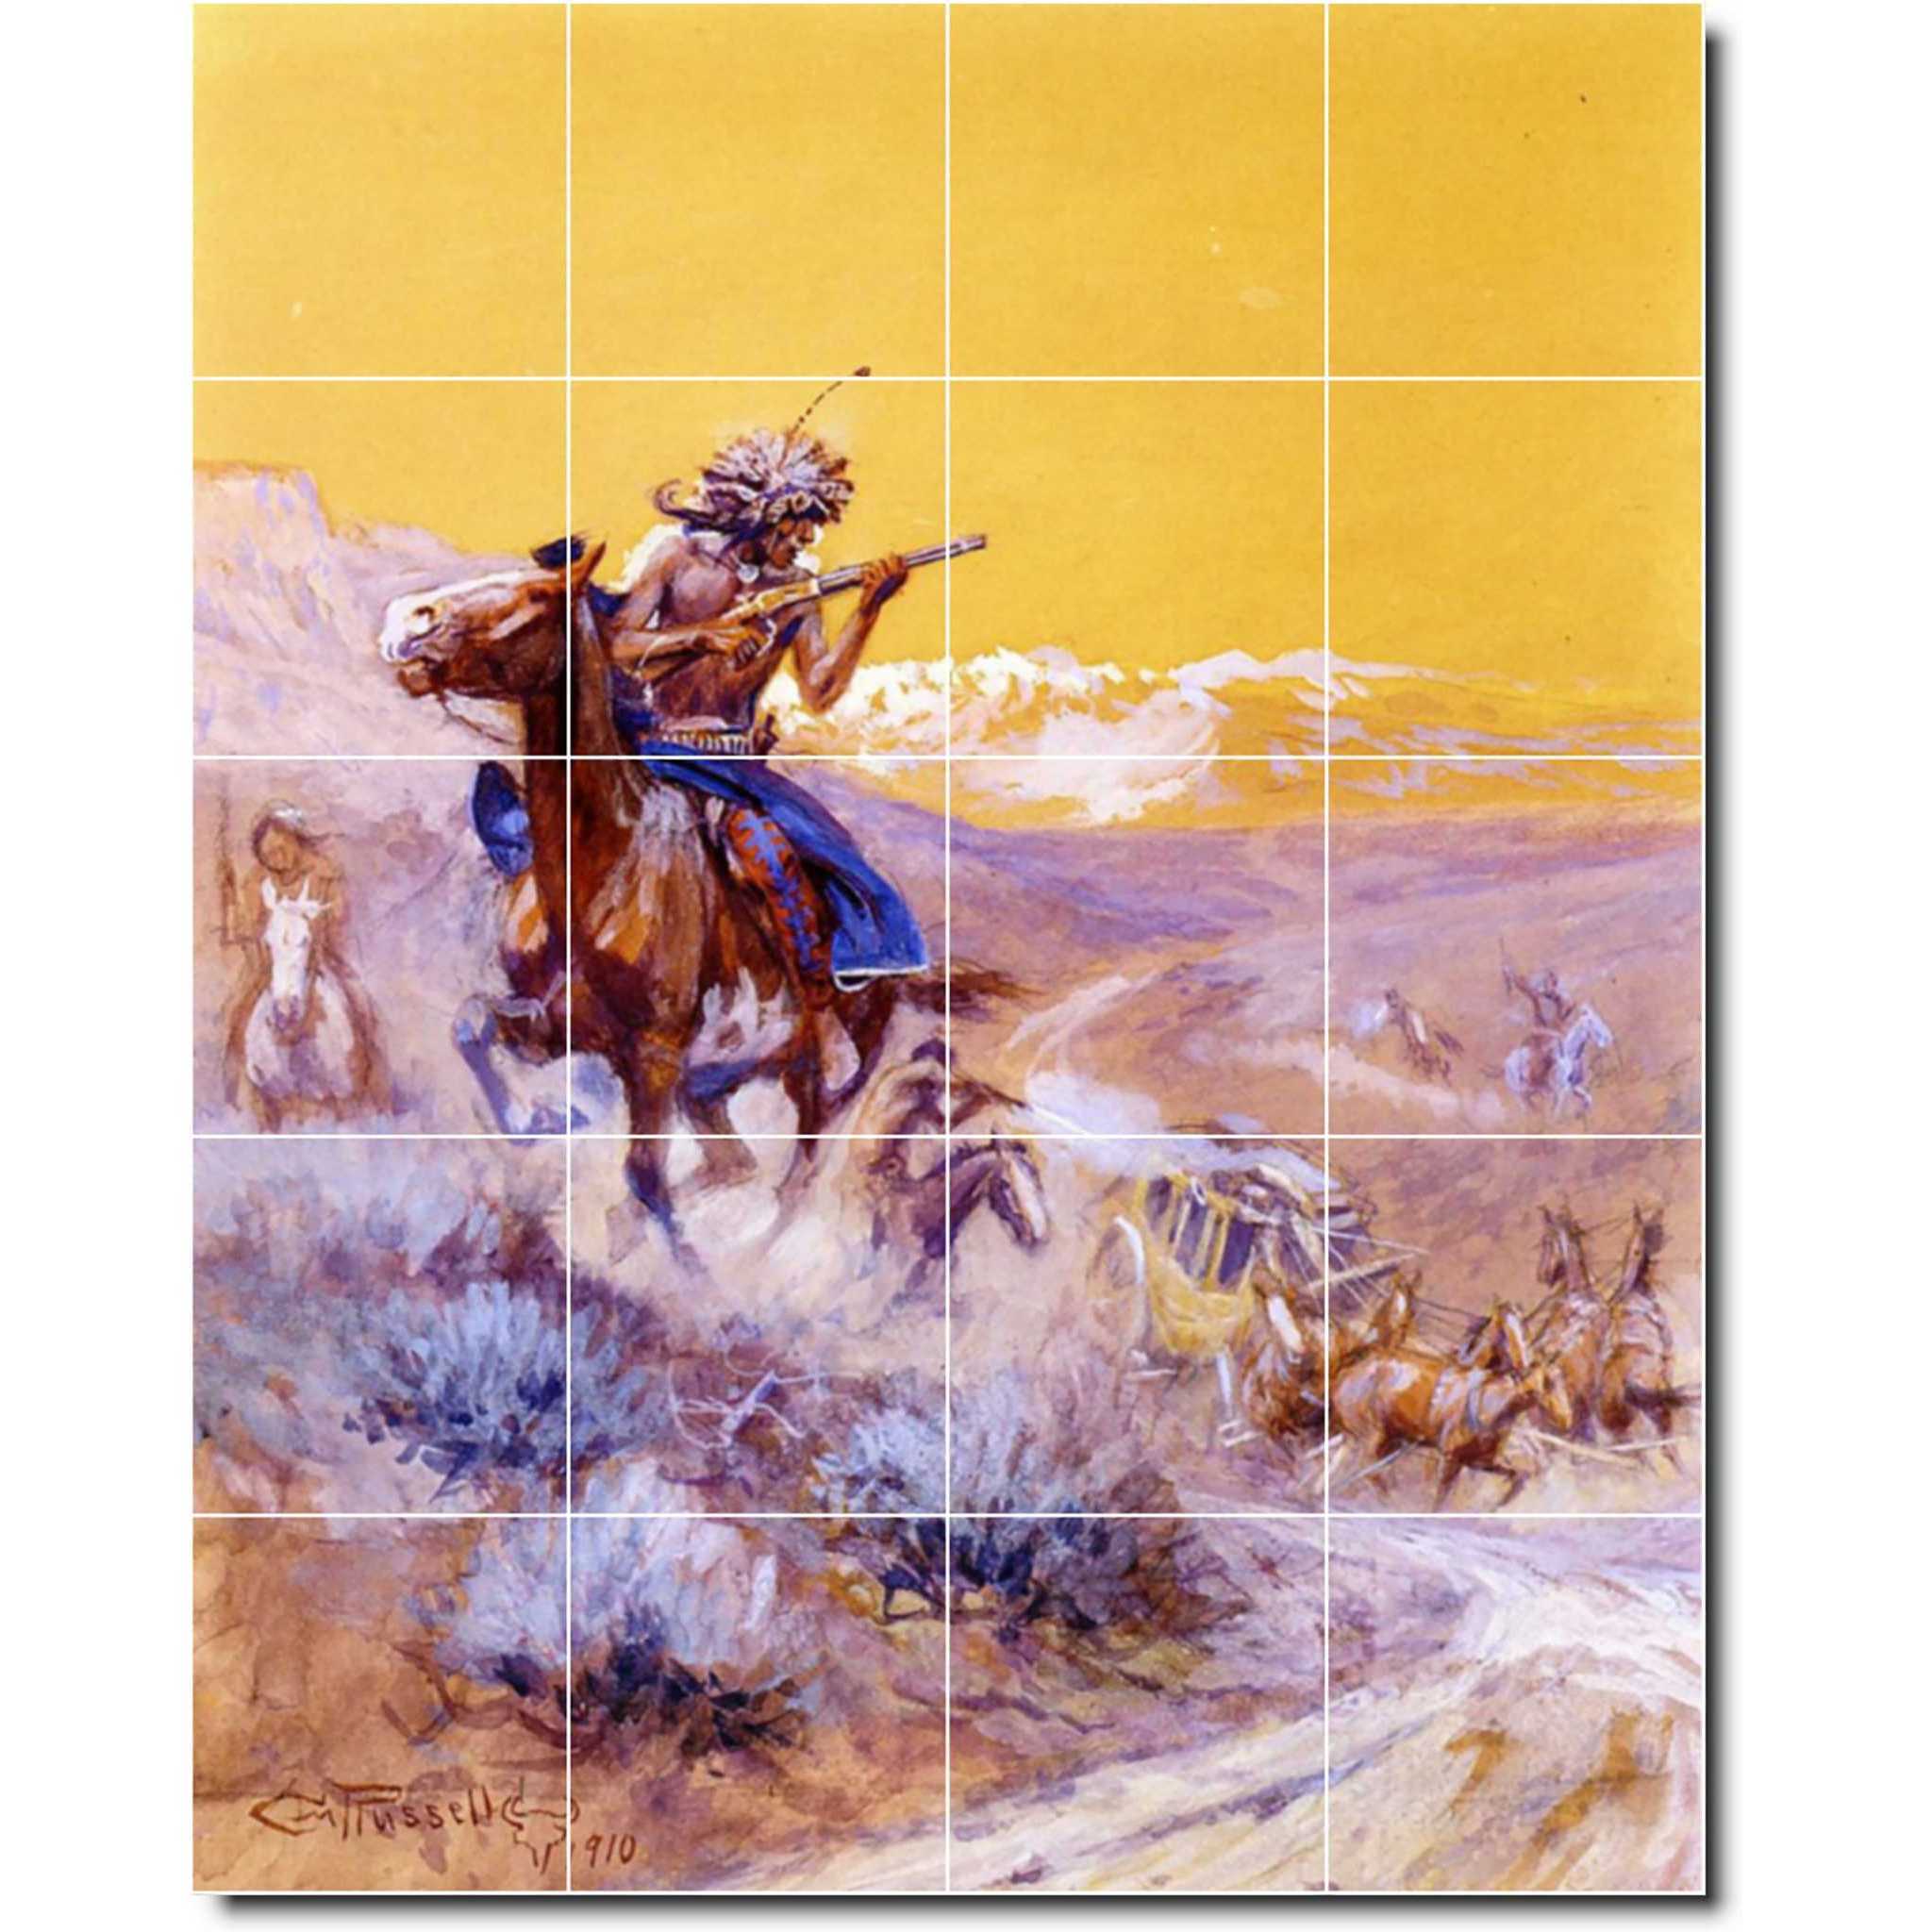 charles russell western painting ceramic tile mural p07767